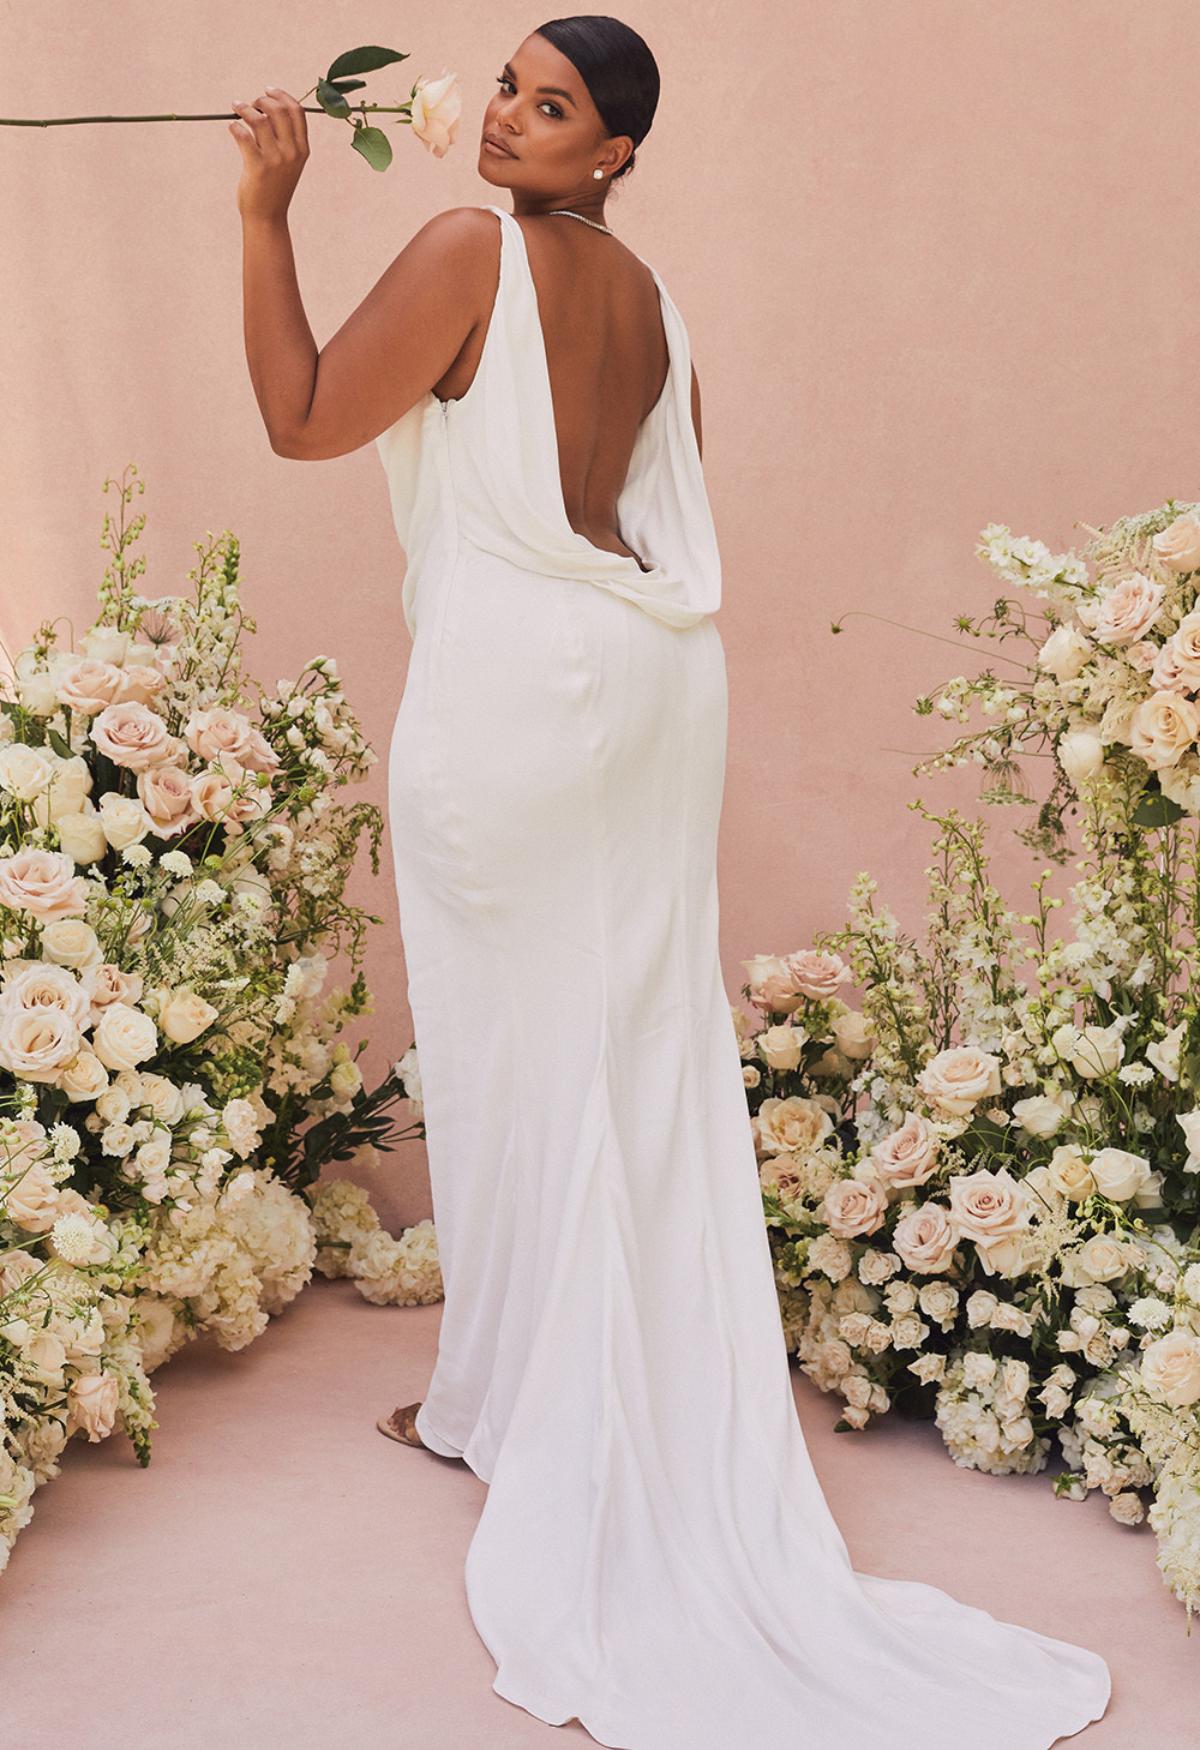 https://cdn0.hitched.co.uk/article/5604/original/1280/png/144065-cheap-wedding-dresses-in-the-uk-house-of-cb-backless.jpeg